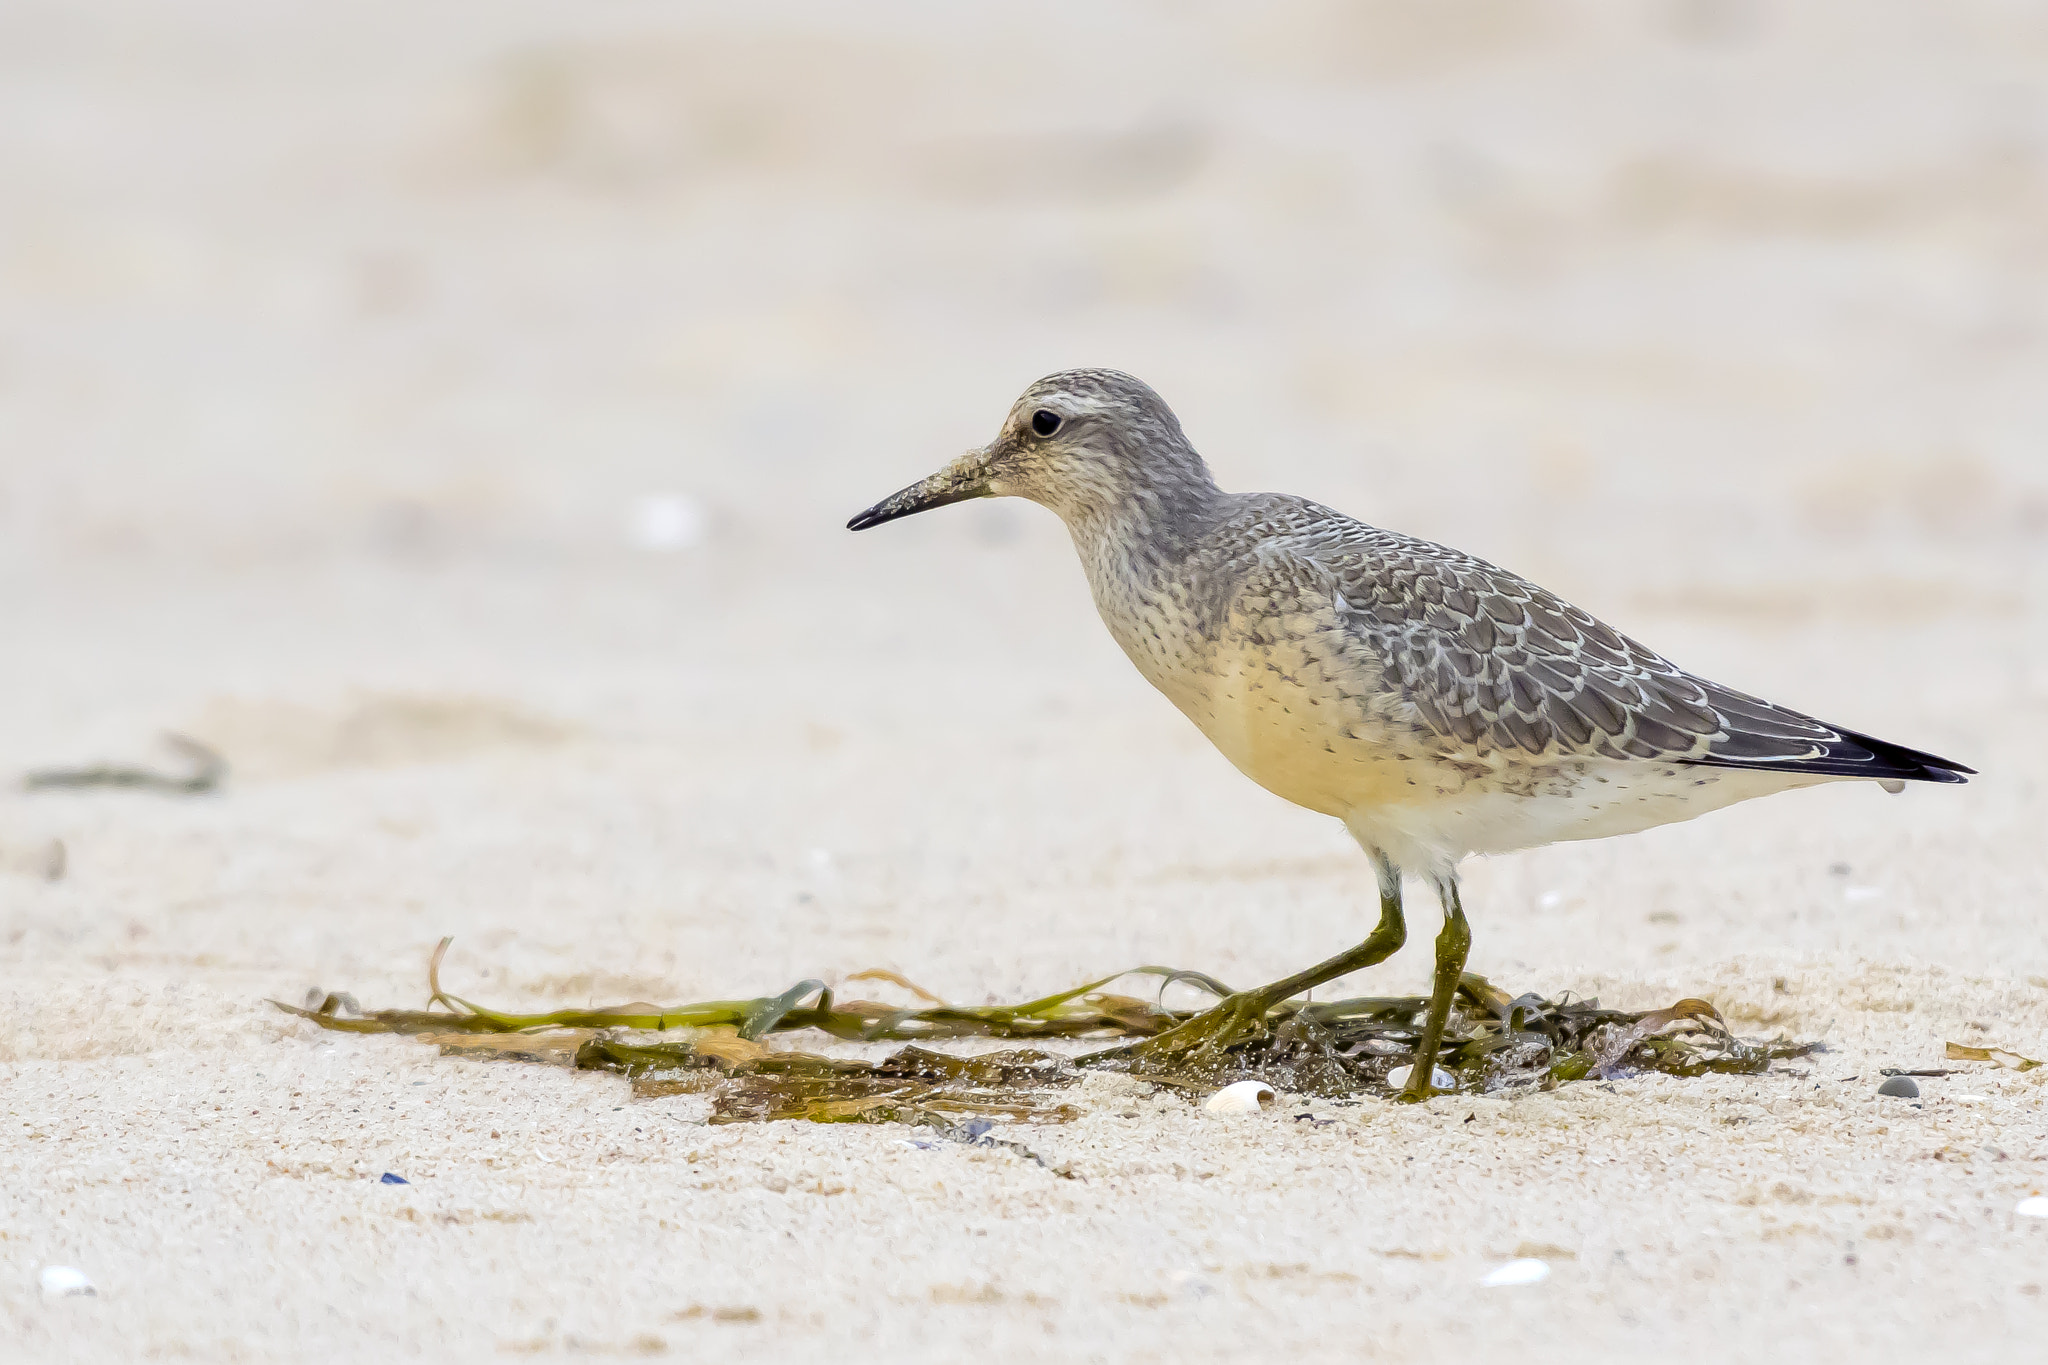 Pentax K-3 + Sigma sample photo. Red knot photography